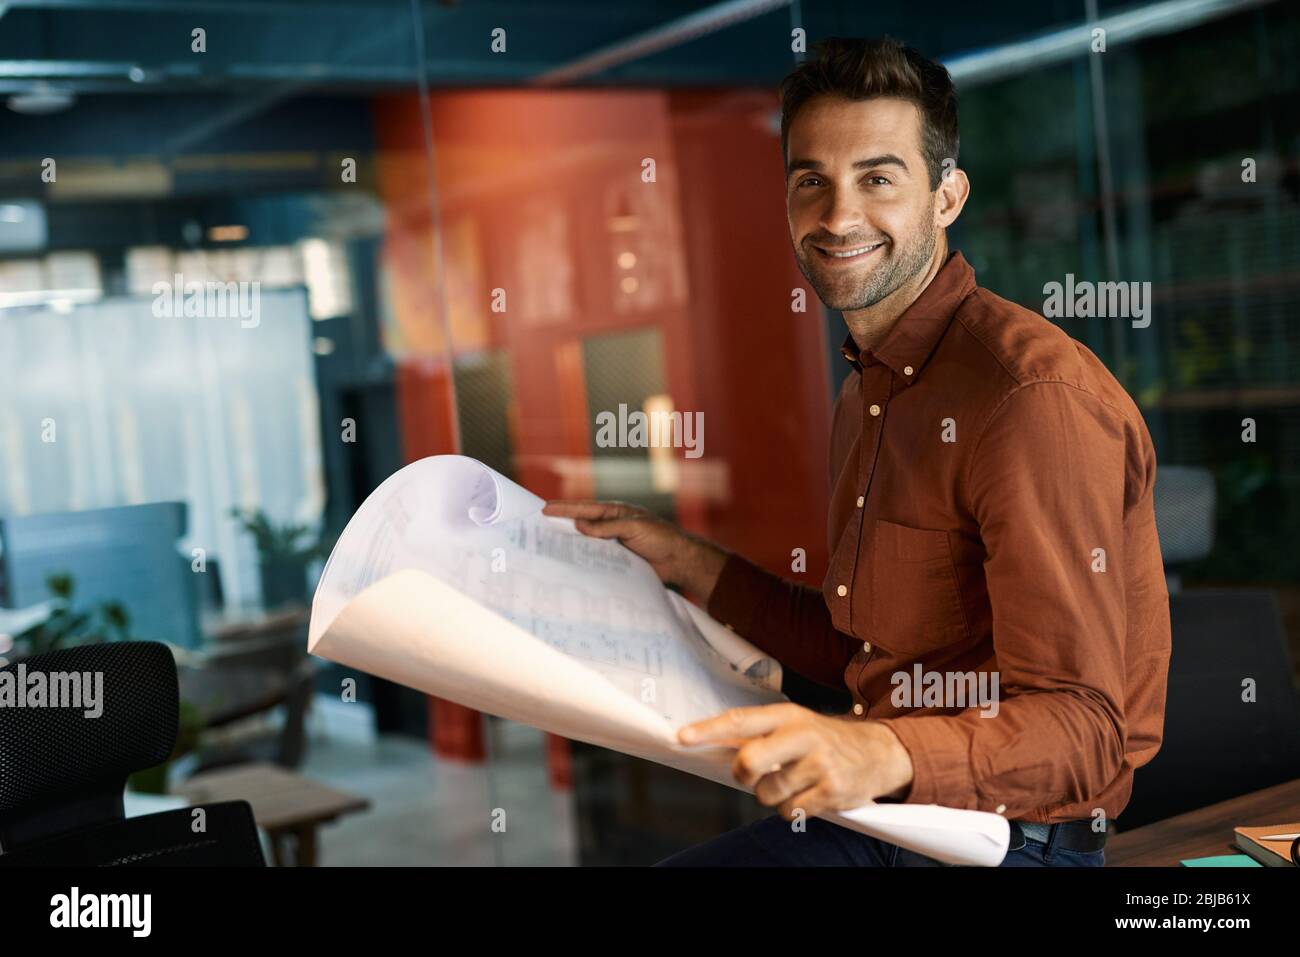 Smiling architect reading blueprints while working late in an office Stock Photo